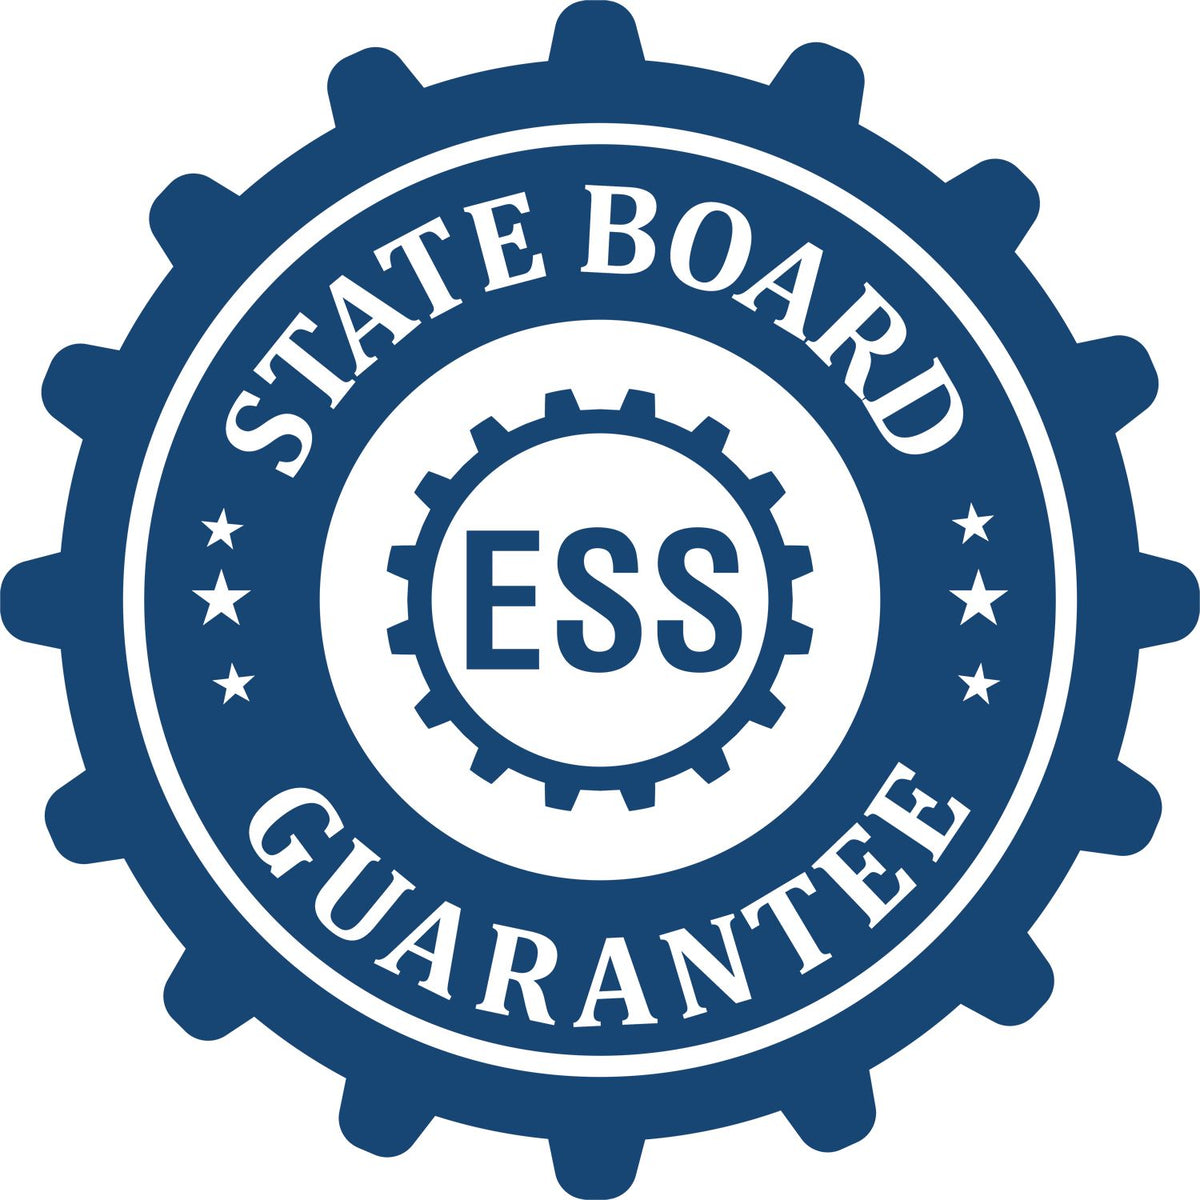 An emblem in a gear shape illustrating a state board guarantee for the Handheld Idaho Land Surveyor Seal product.